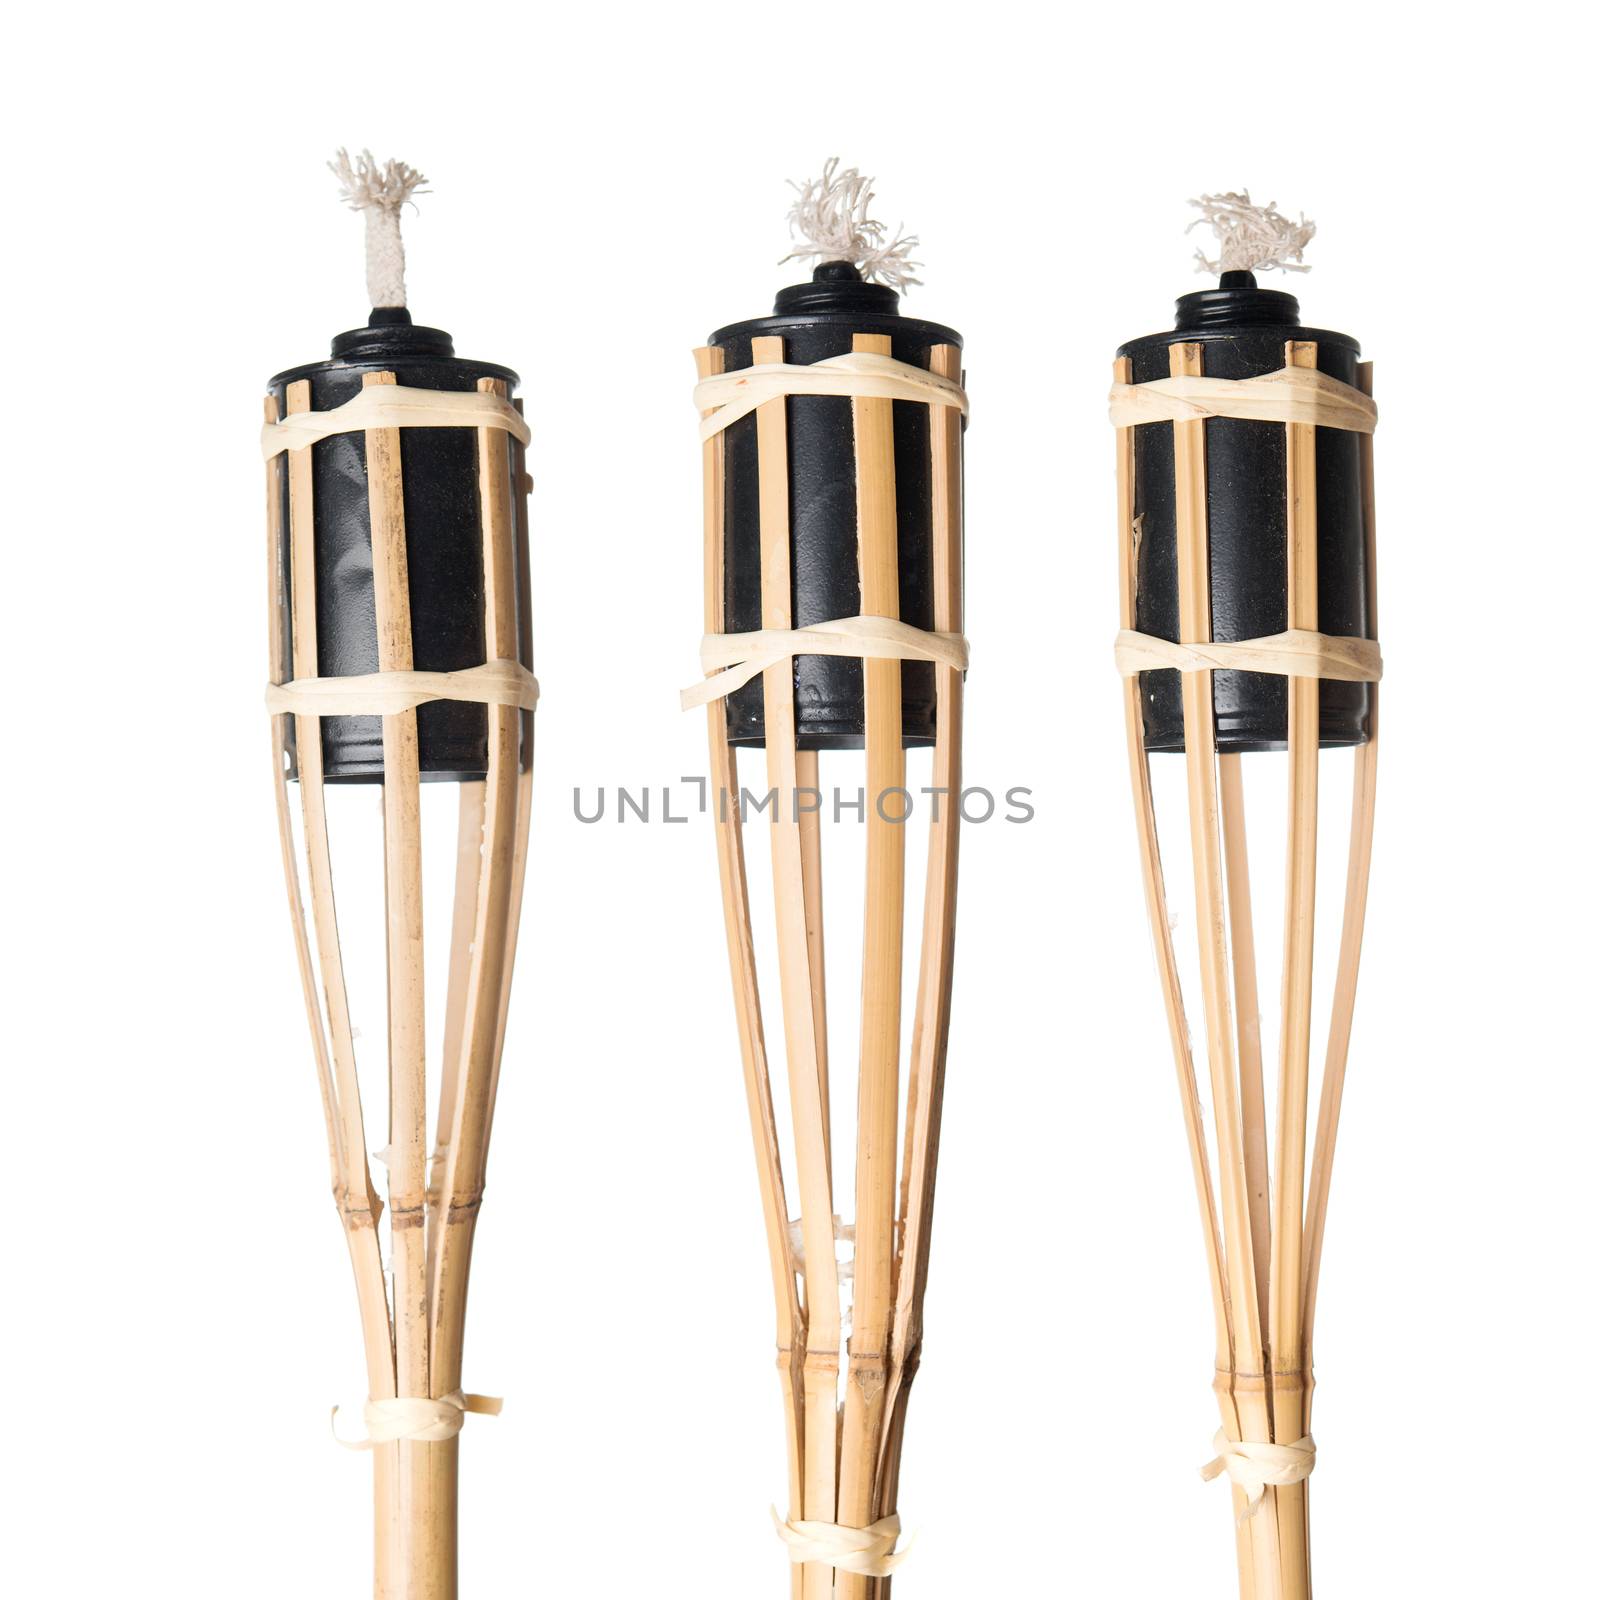 Bamboo torches isolated on white background.